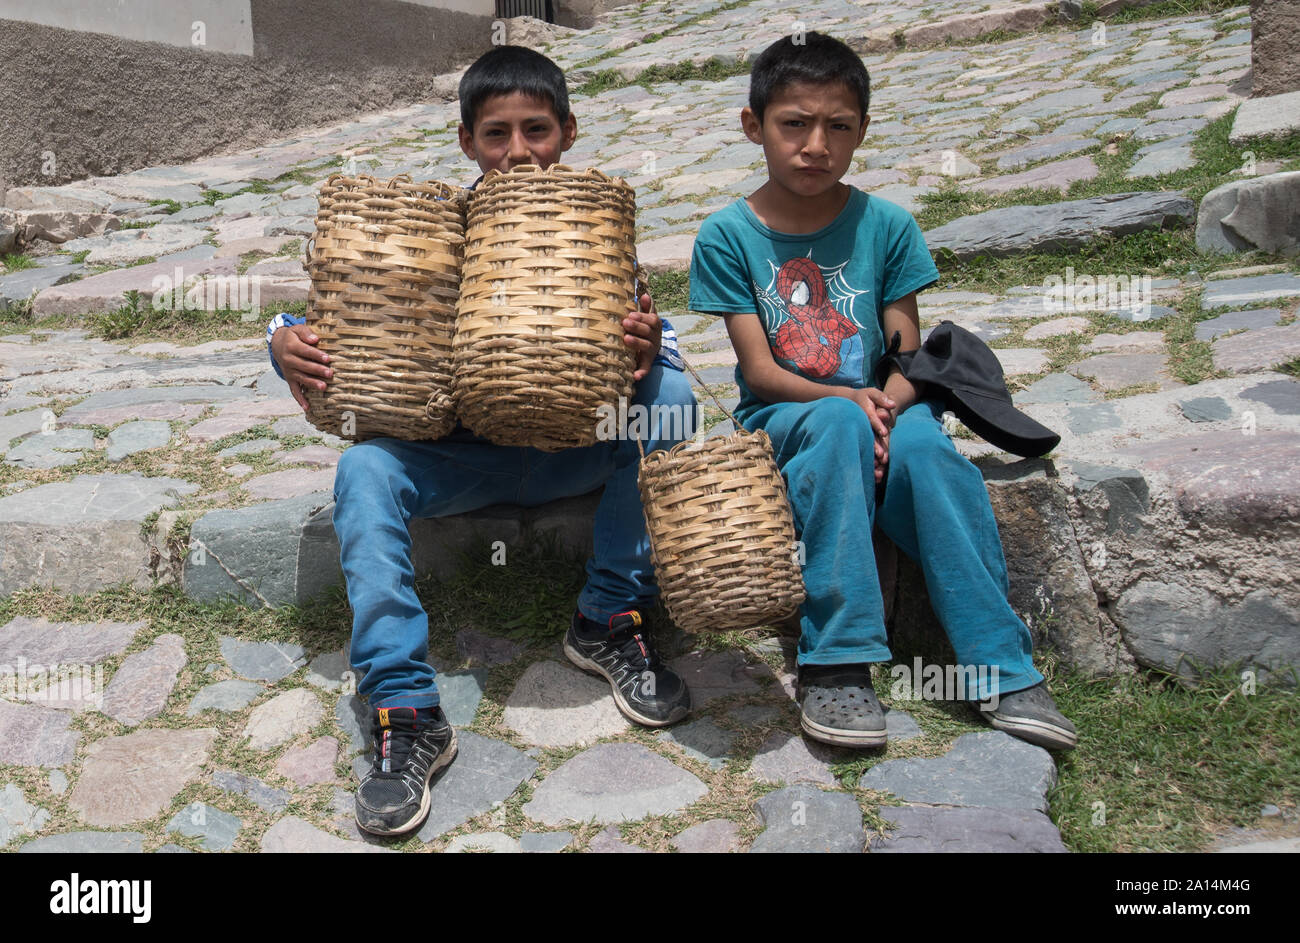 Iruya, Argentina - March 06 2017: Kids selling figs in the streets of an old town hiden inside the mountains in the province of Salta. Stock Photo